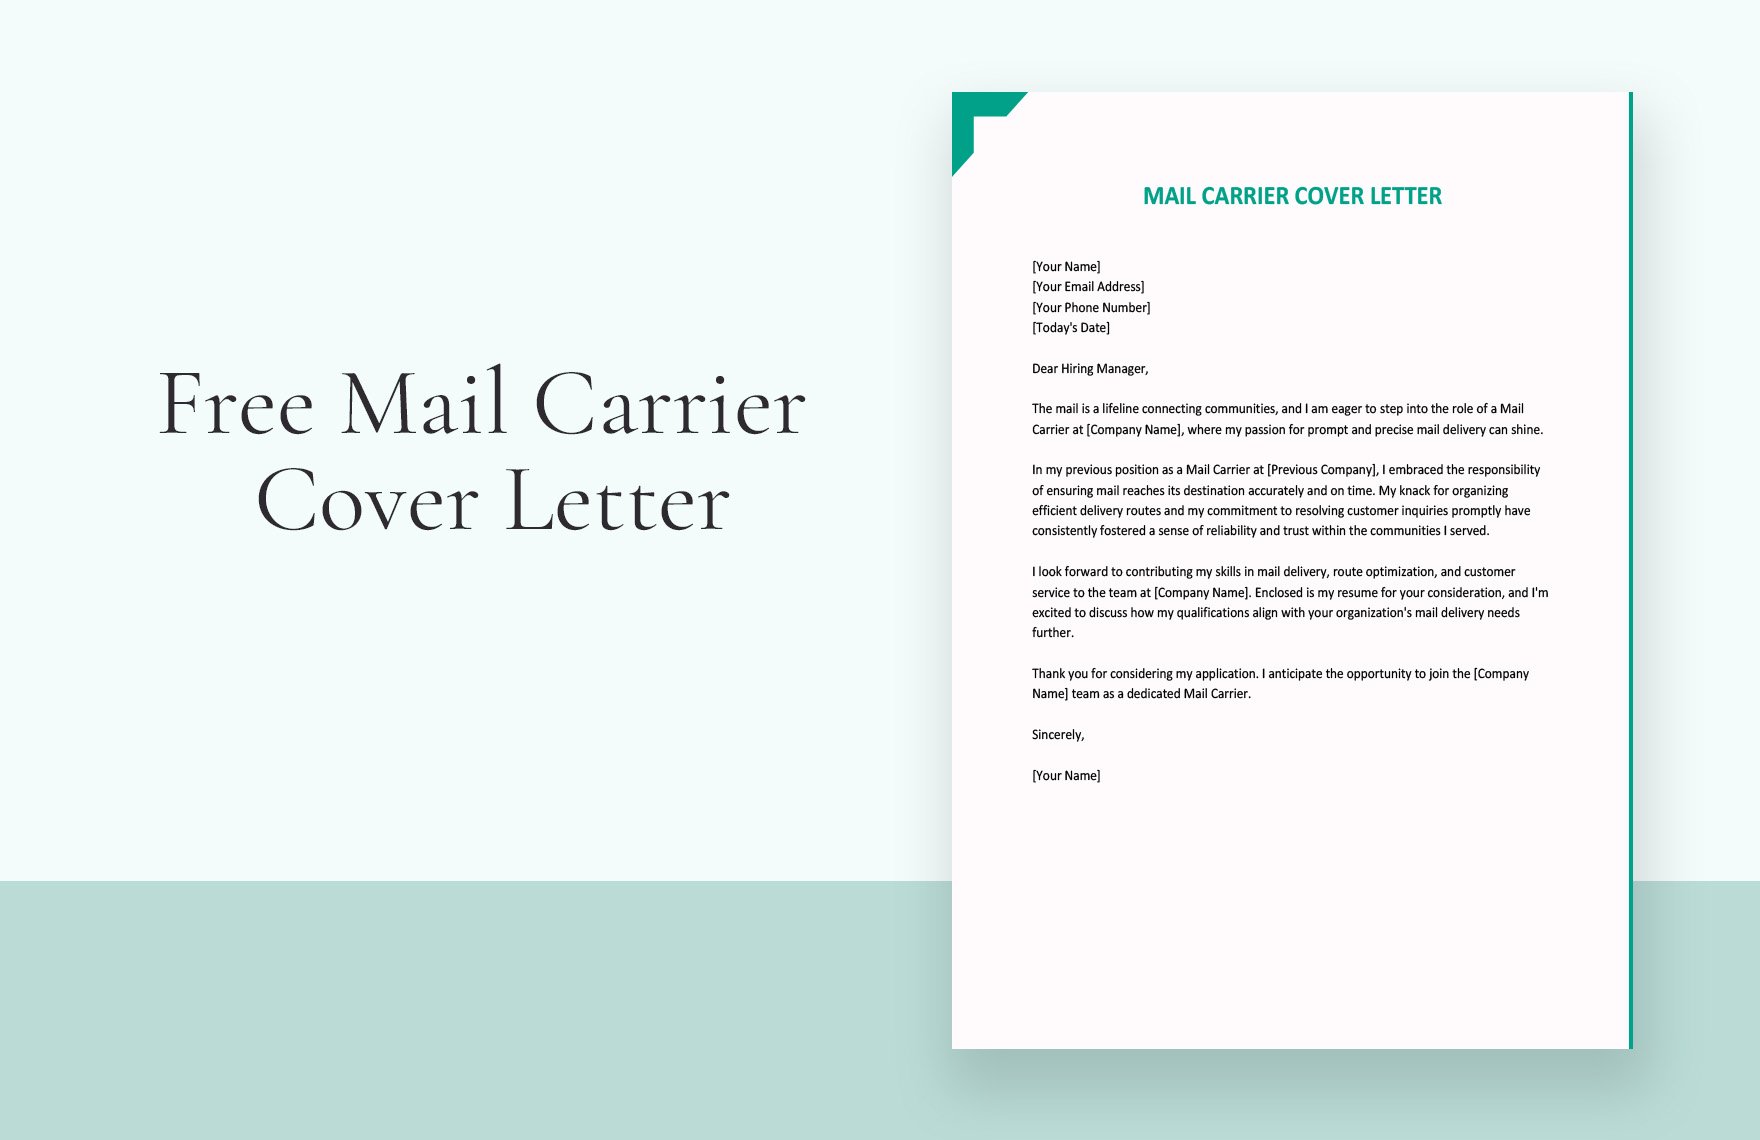 Mail Carrier Cover Letter in Word, Google Docs